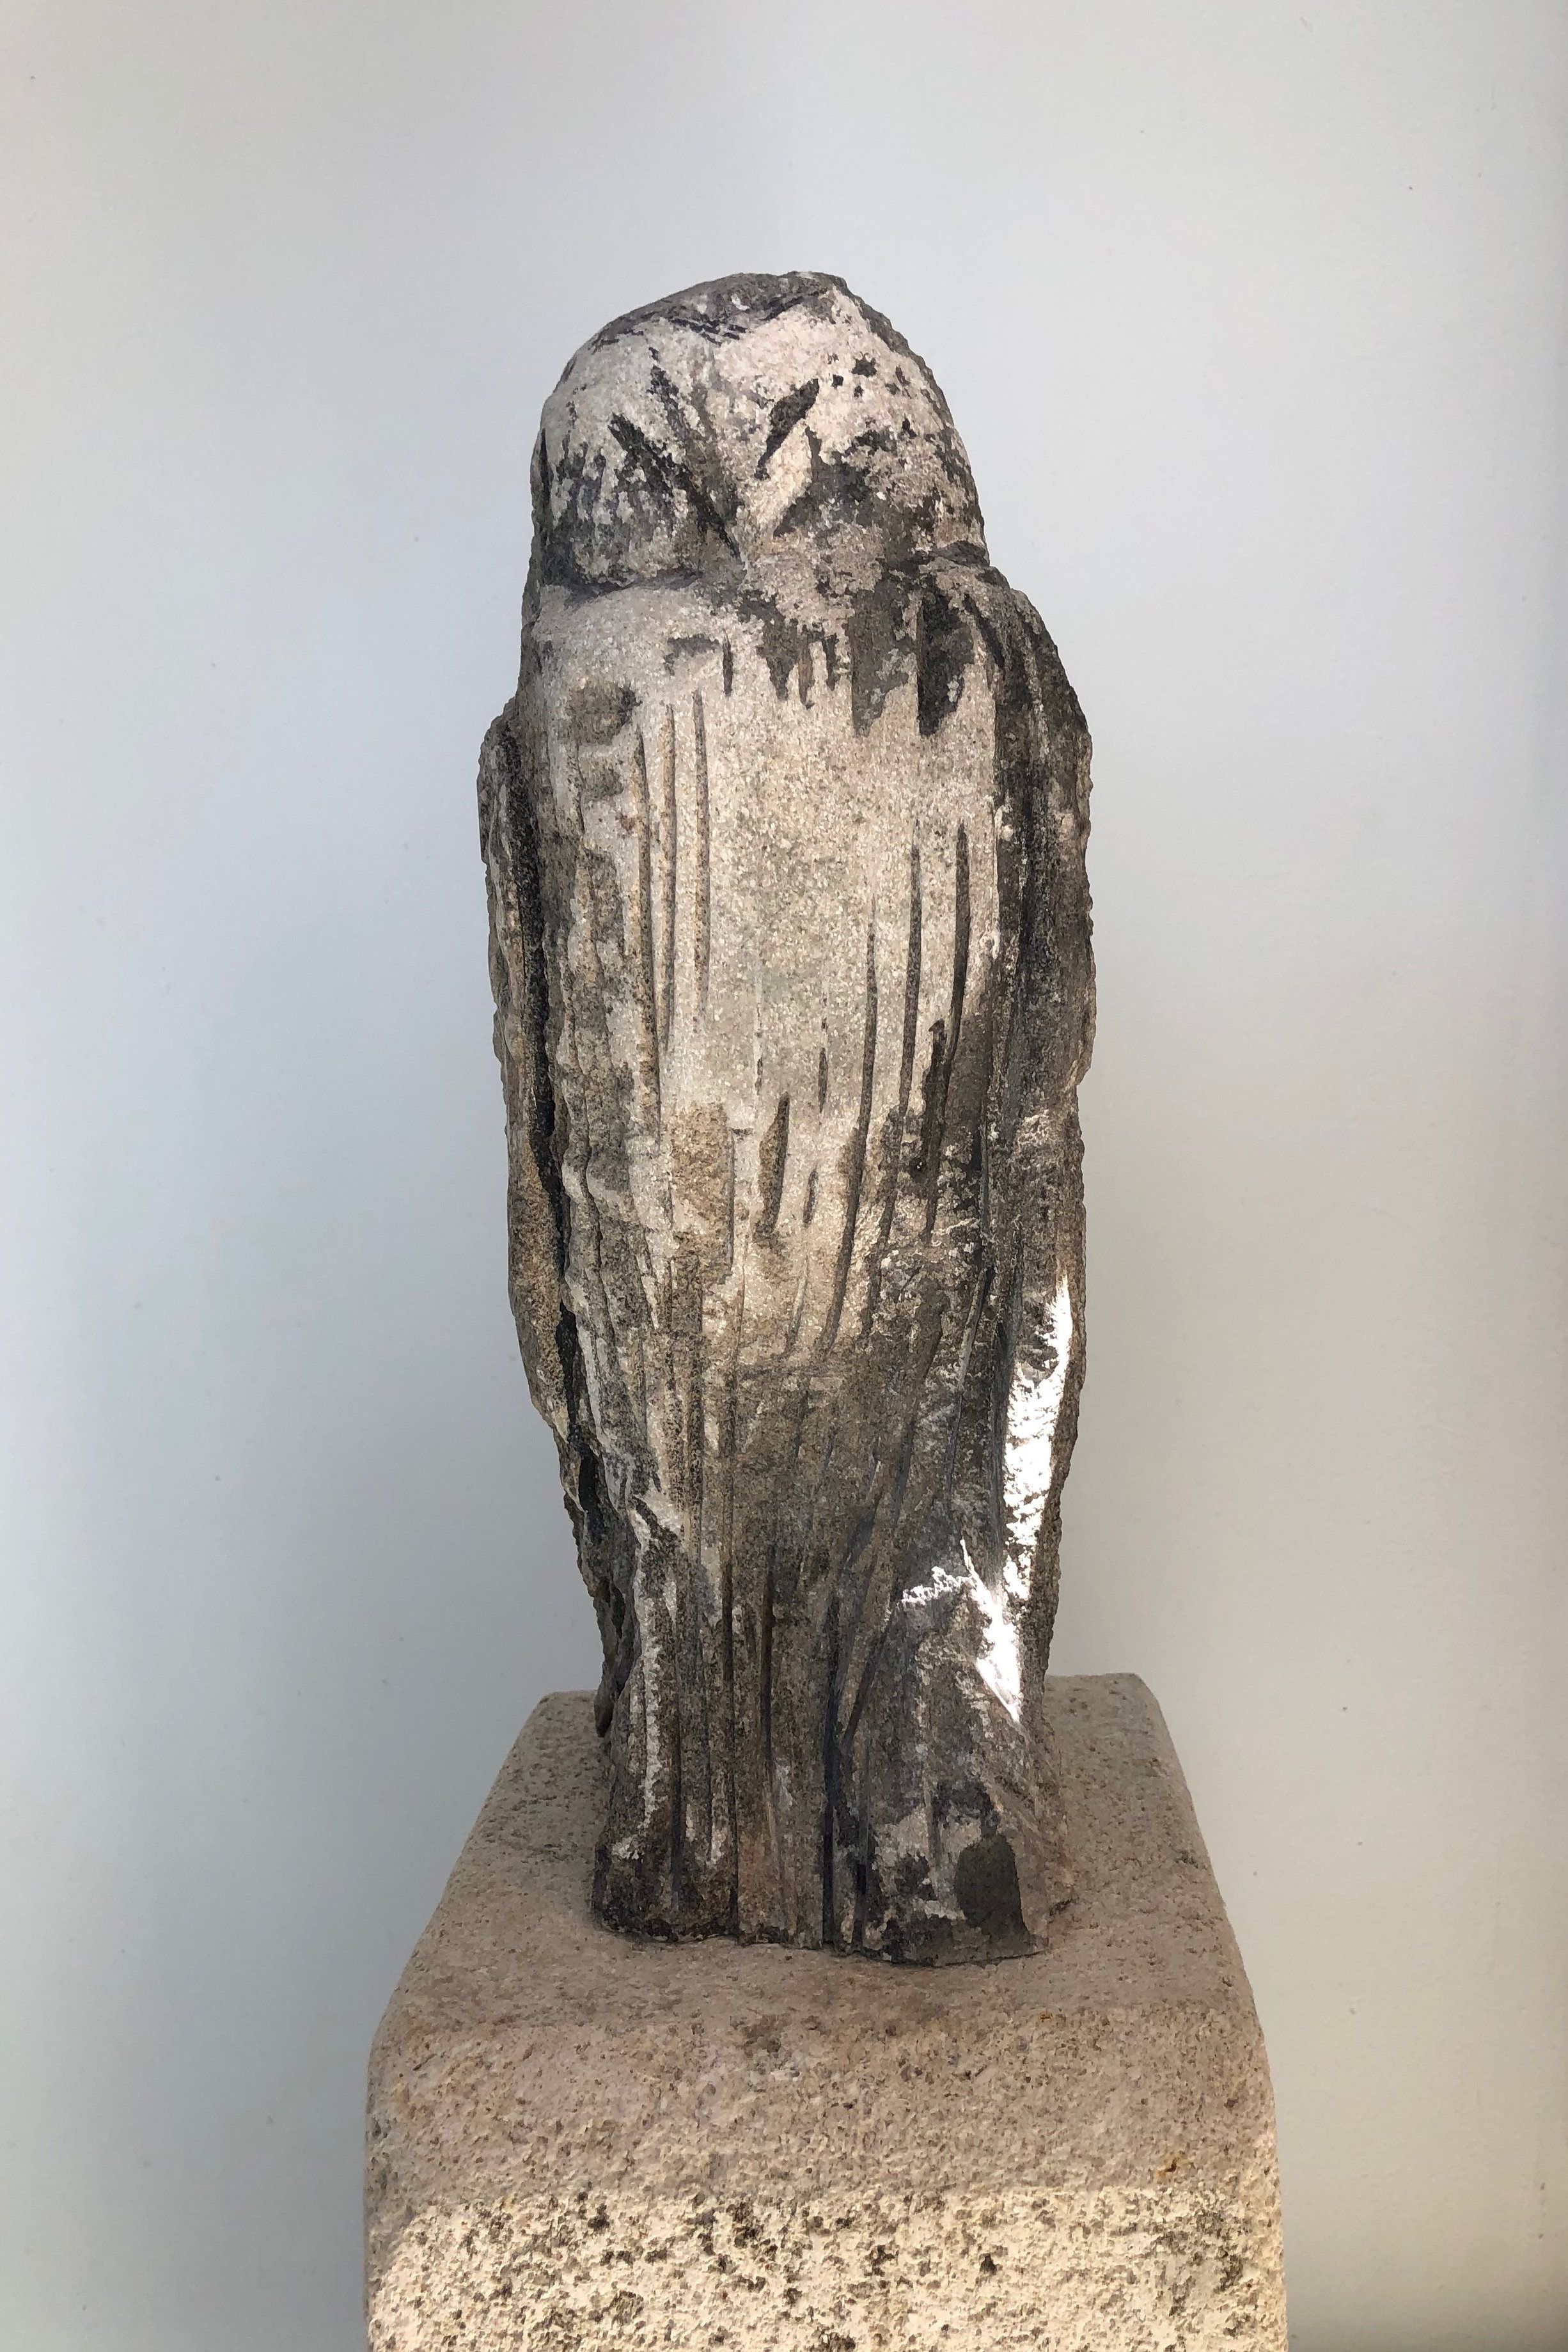  “Barn Owl,” 2019  Provencal limestone and pigment  13.5 x 4.5 x 6 inches 